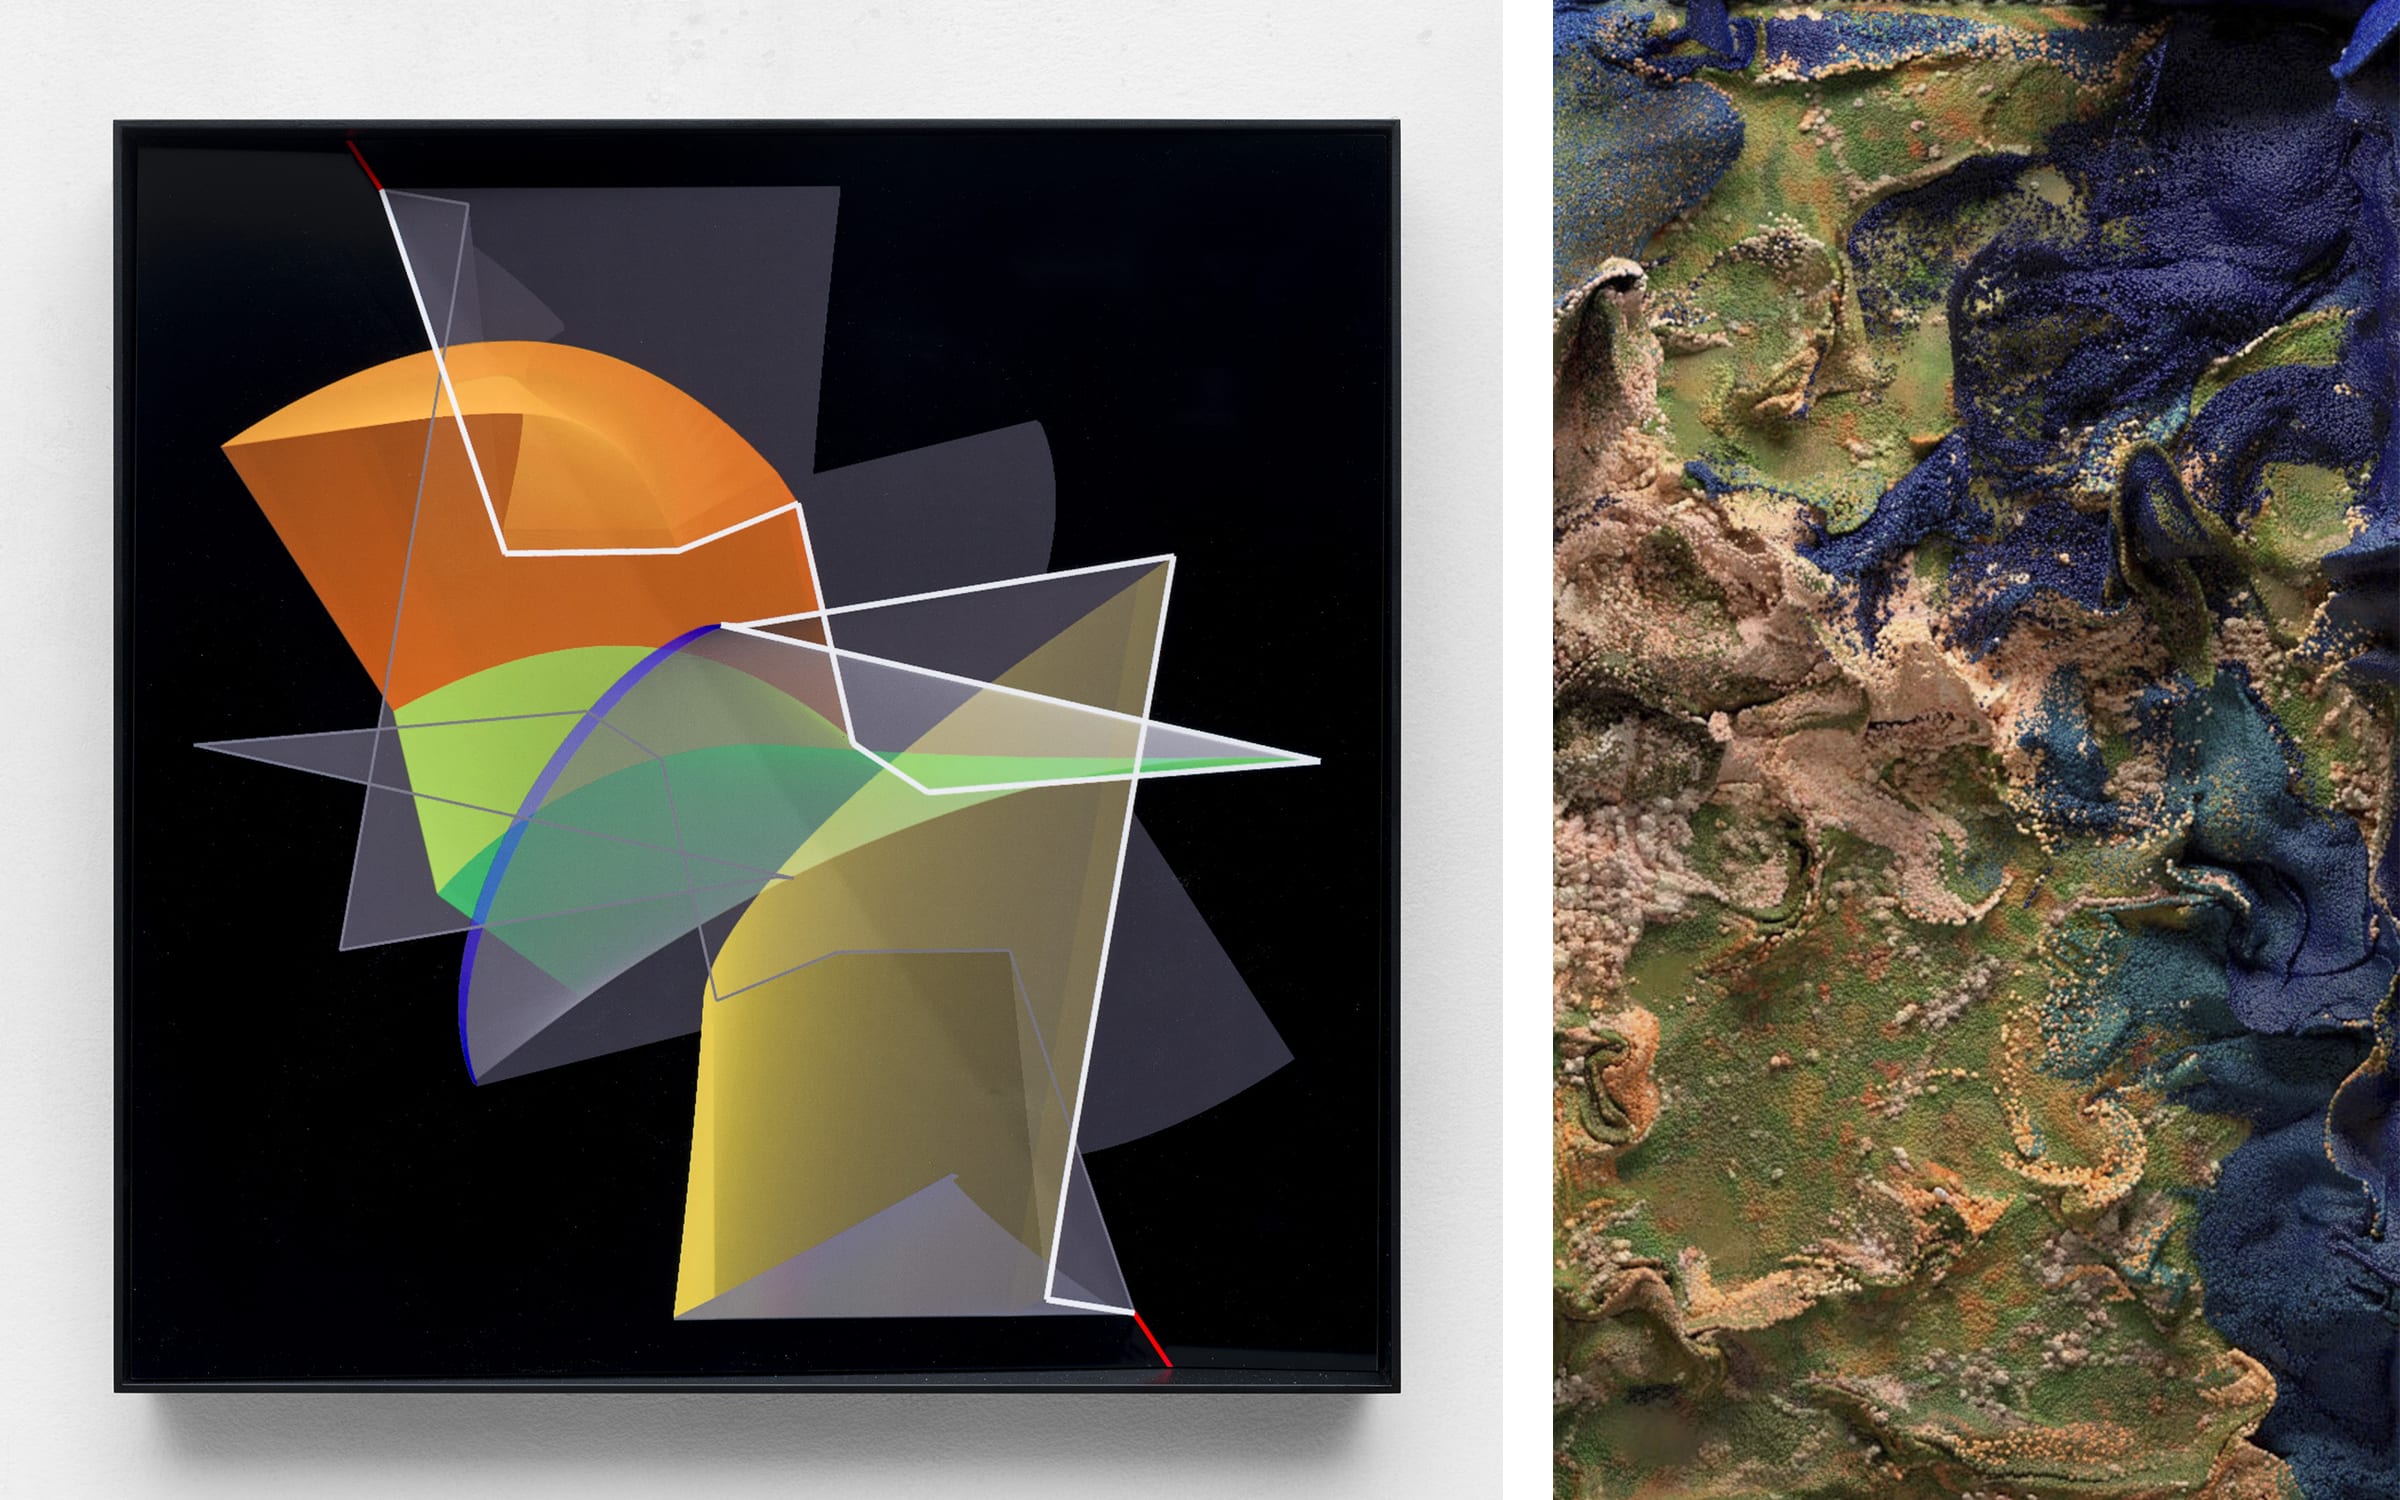 Left: Manfred Mohr, P3010_5, 2020-2021. Courtesy of the artist and bitforms gallery. Photograph by Emile Askey. Right: Refik Anadol, Machine Hallucinations - Satellite Simulations - A, 2023. Courtesy of the artist and bitforms gallery.